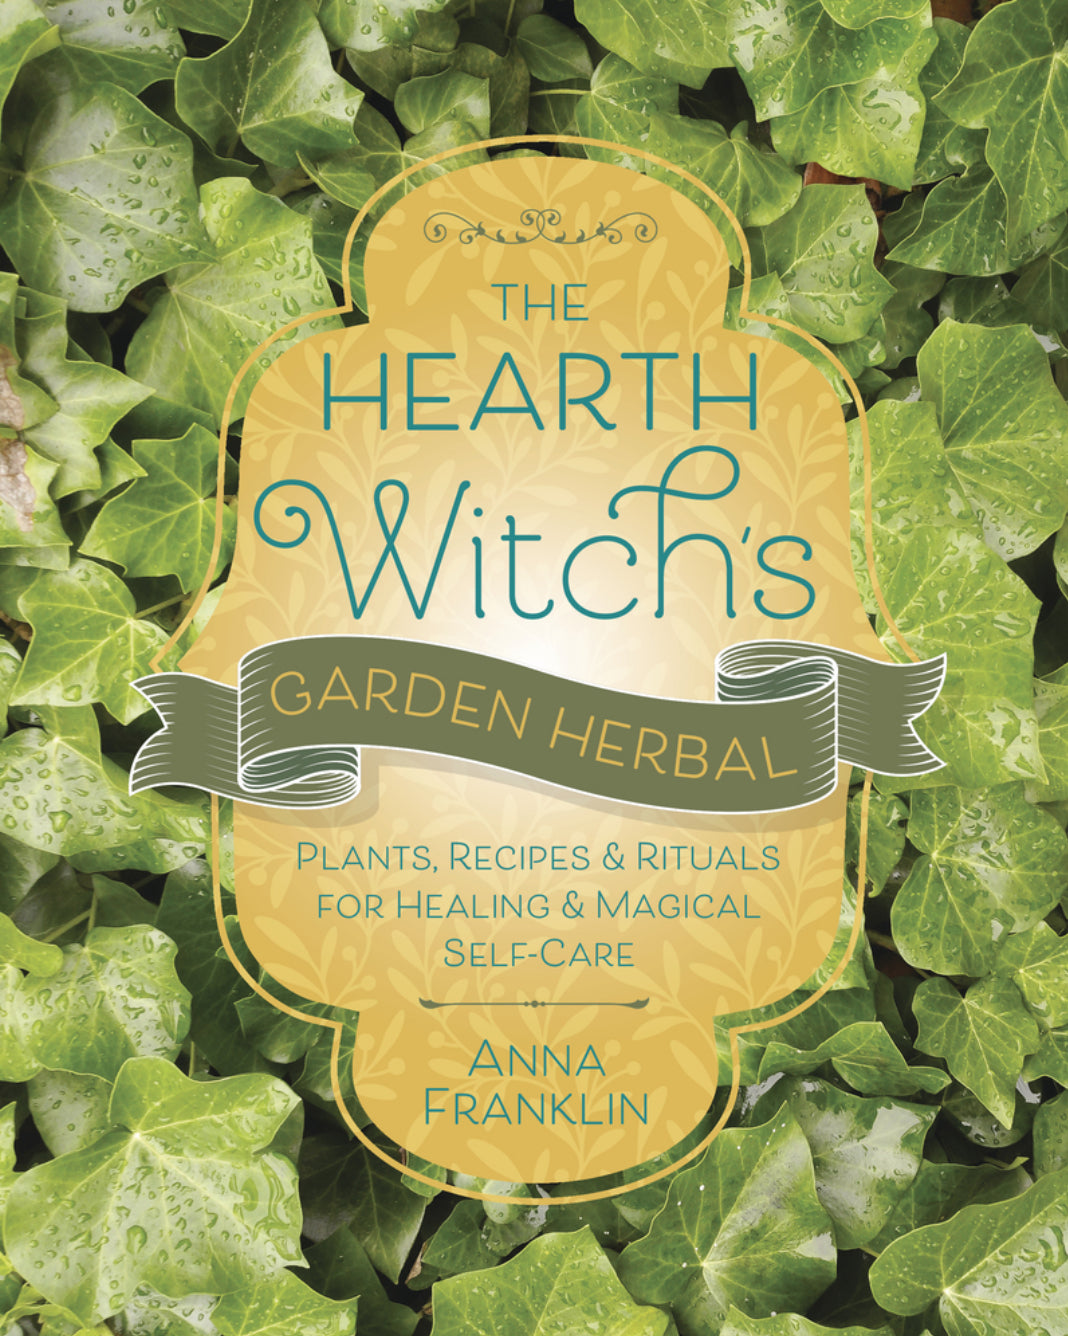 The Hearth Witch's Garden Herbal